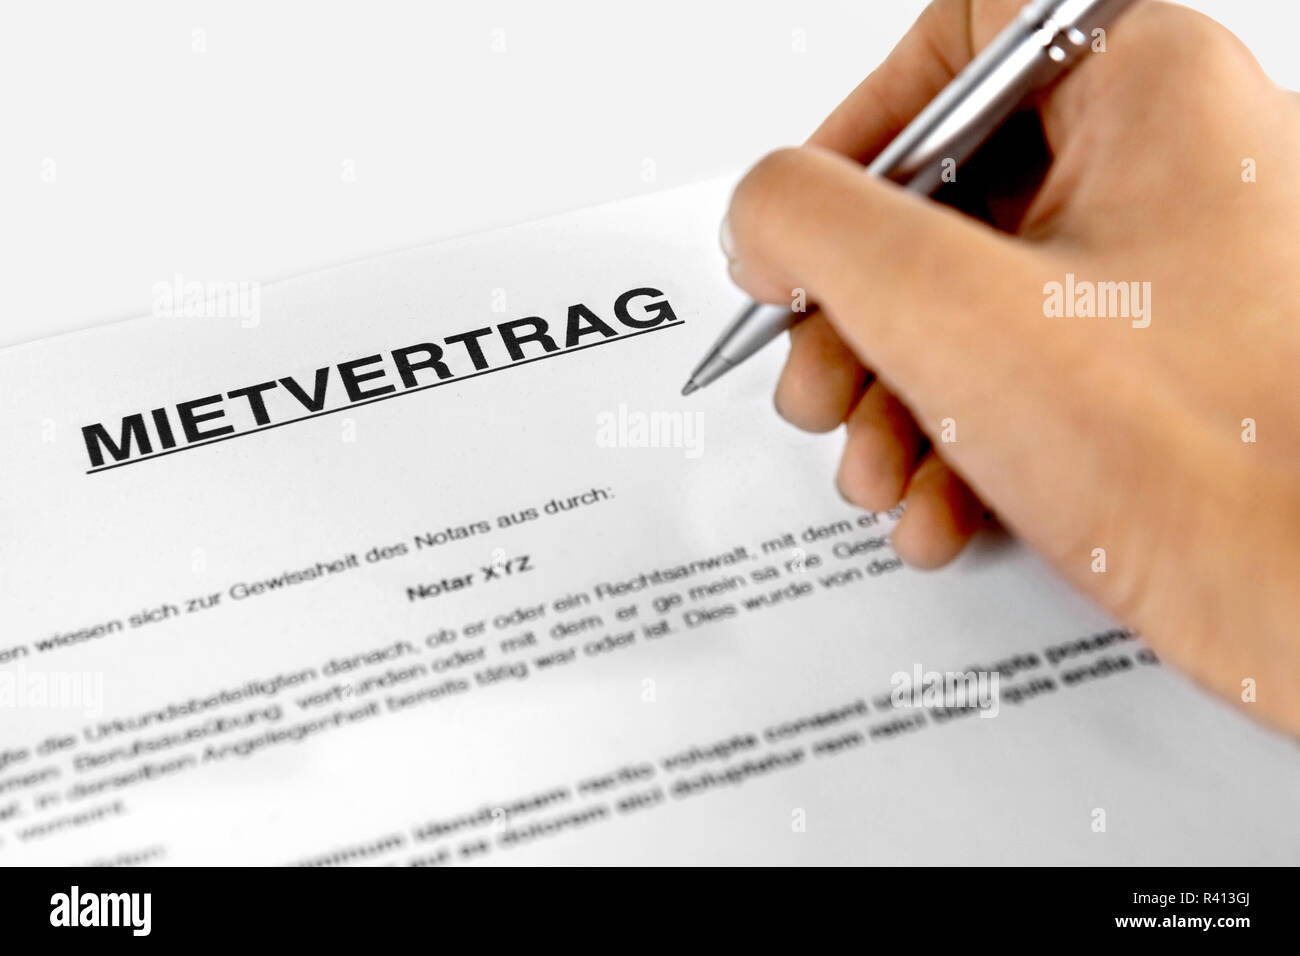 Rental agreement form with signing hand Stock Photo